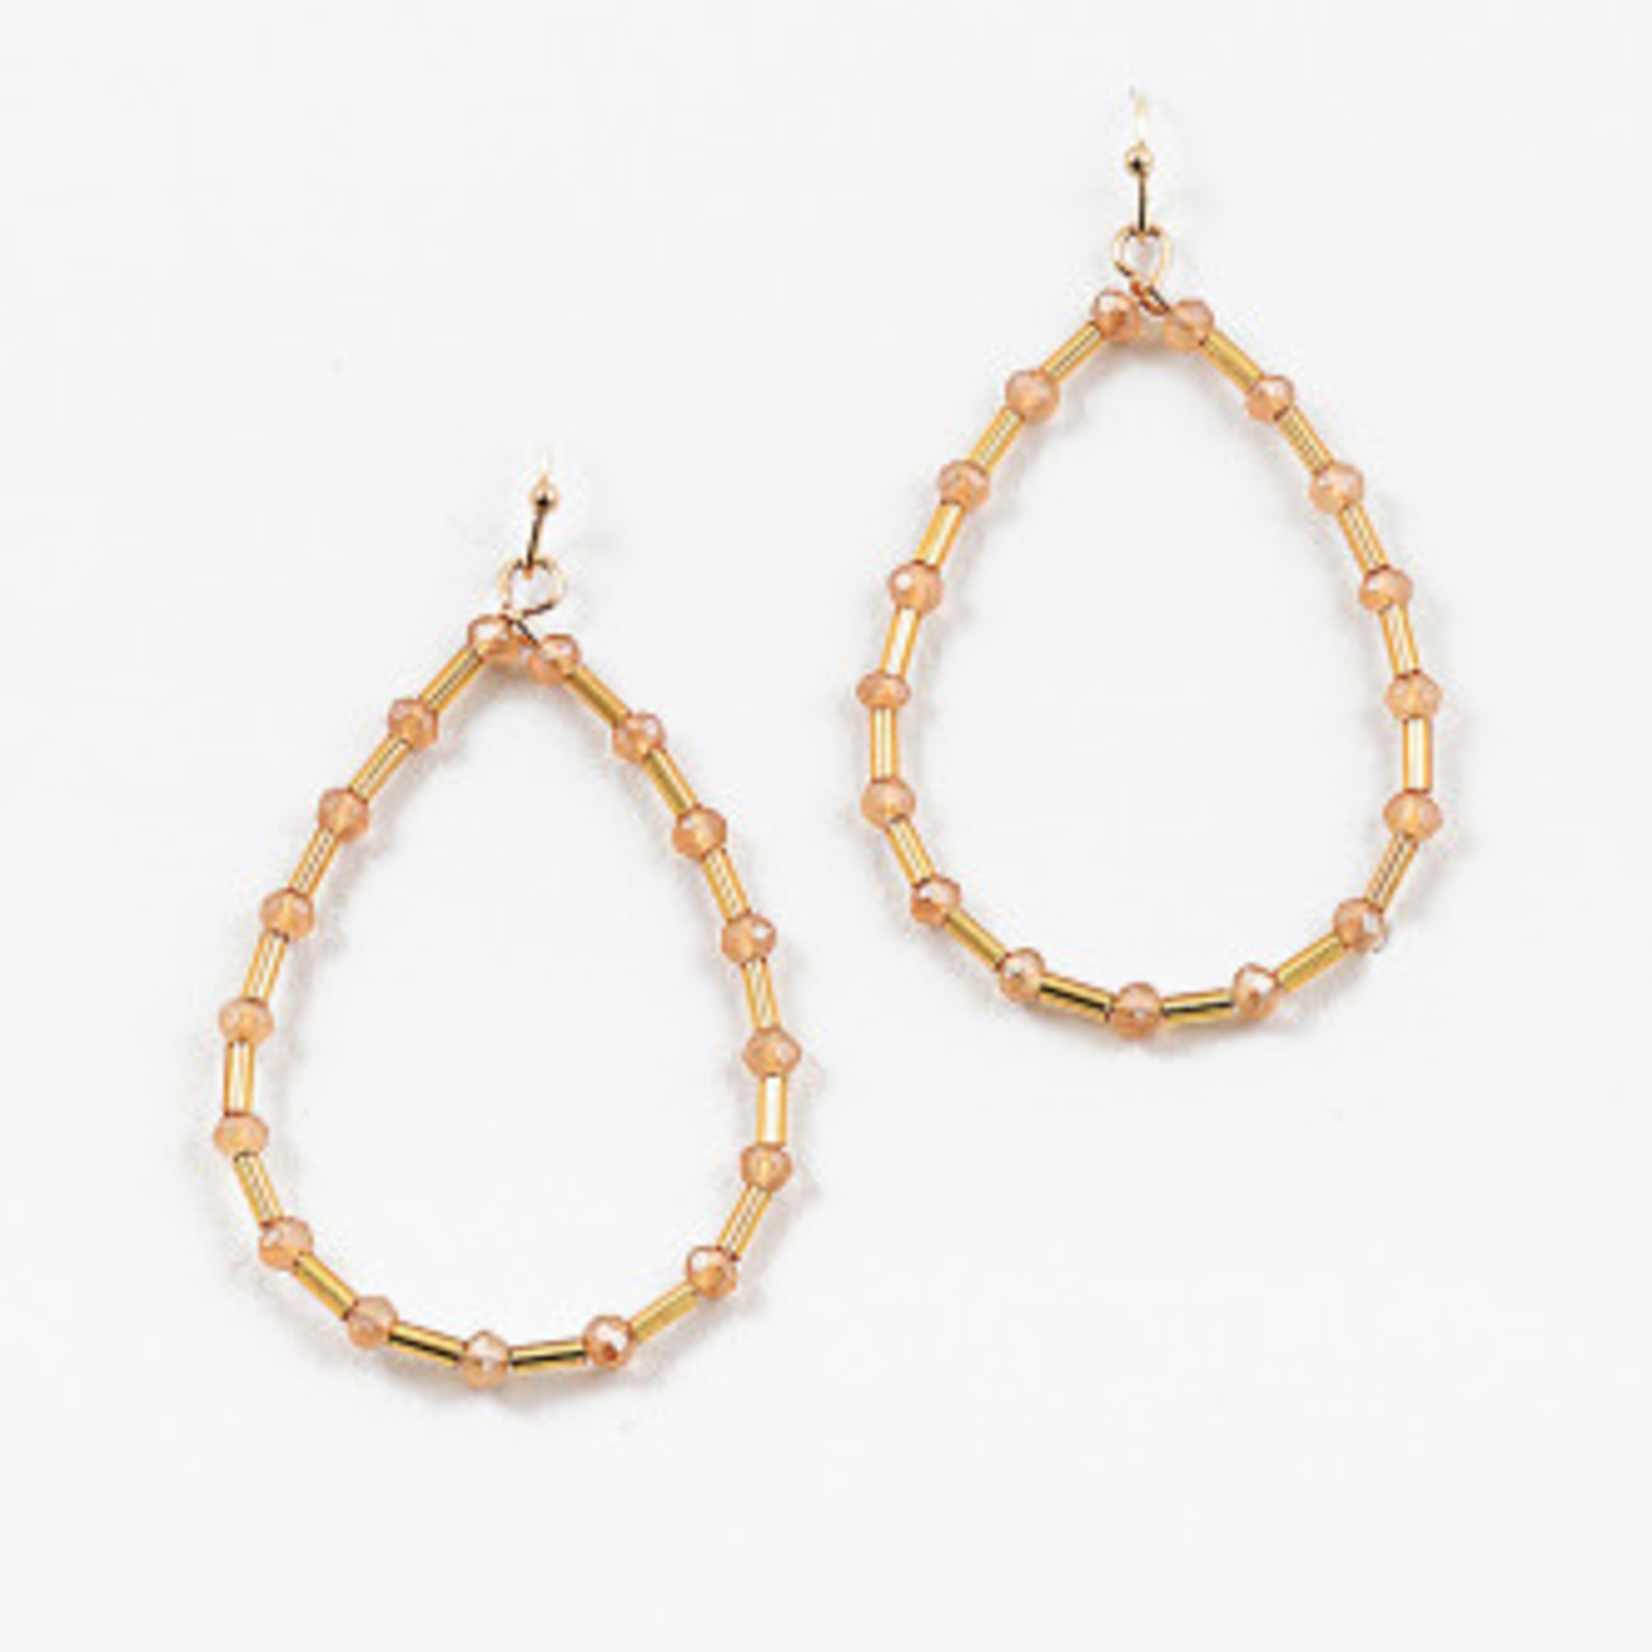 Champagne and Gold Beaded Teardrop Earrings